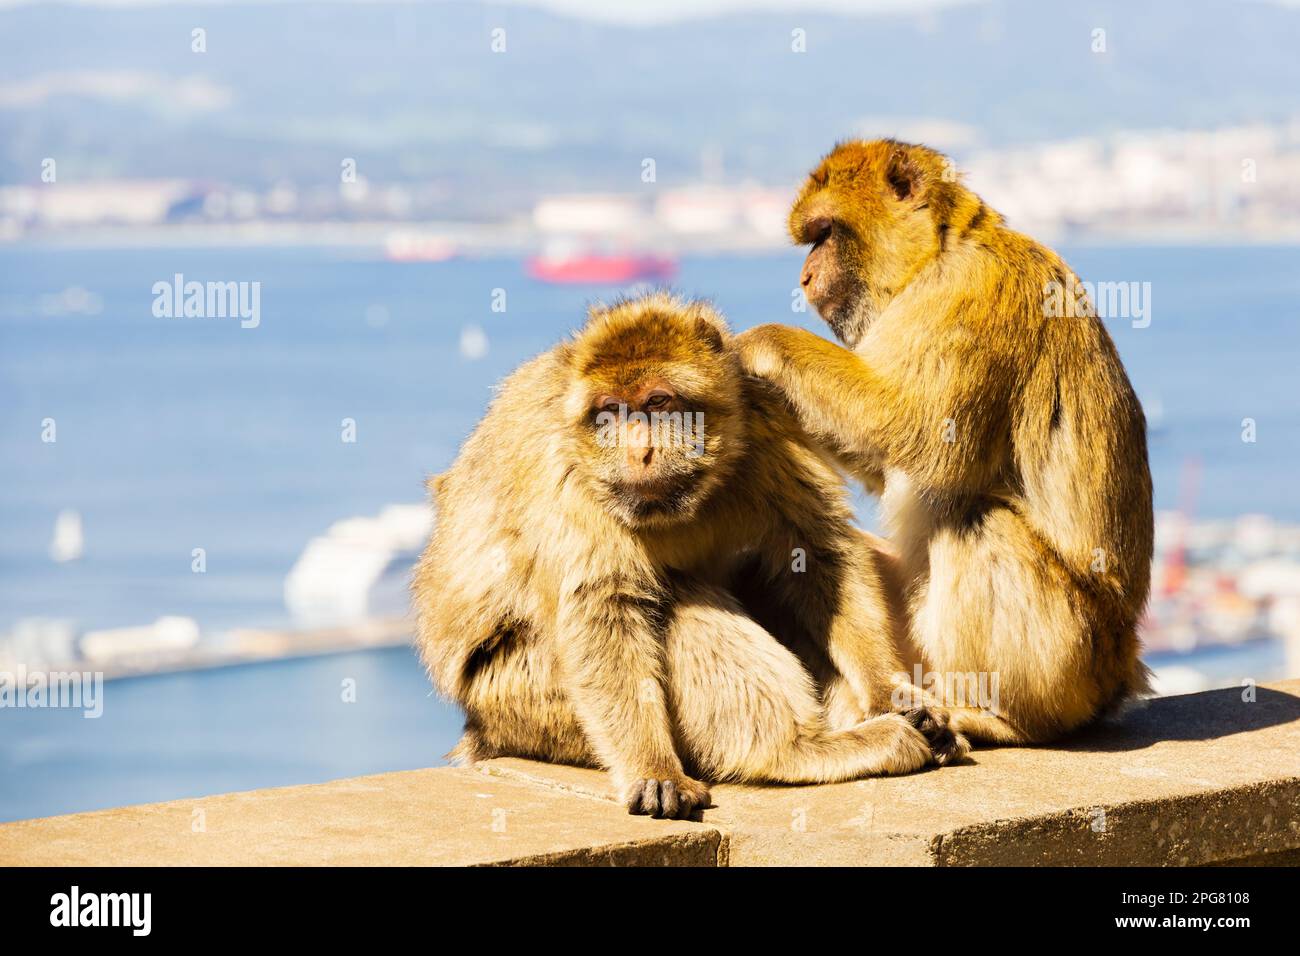 The famous Barbary Macaques grooming. British Overseas Territory of Gibraltar, the Rock of Gibraltar on the Iberian Peninsula. Stock Photo